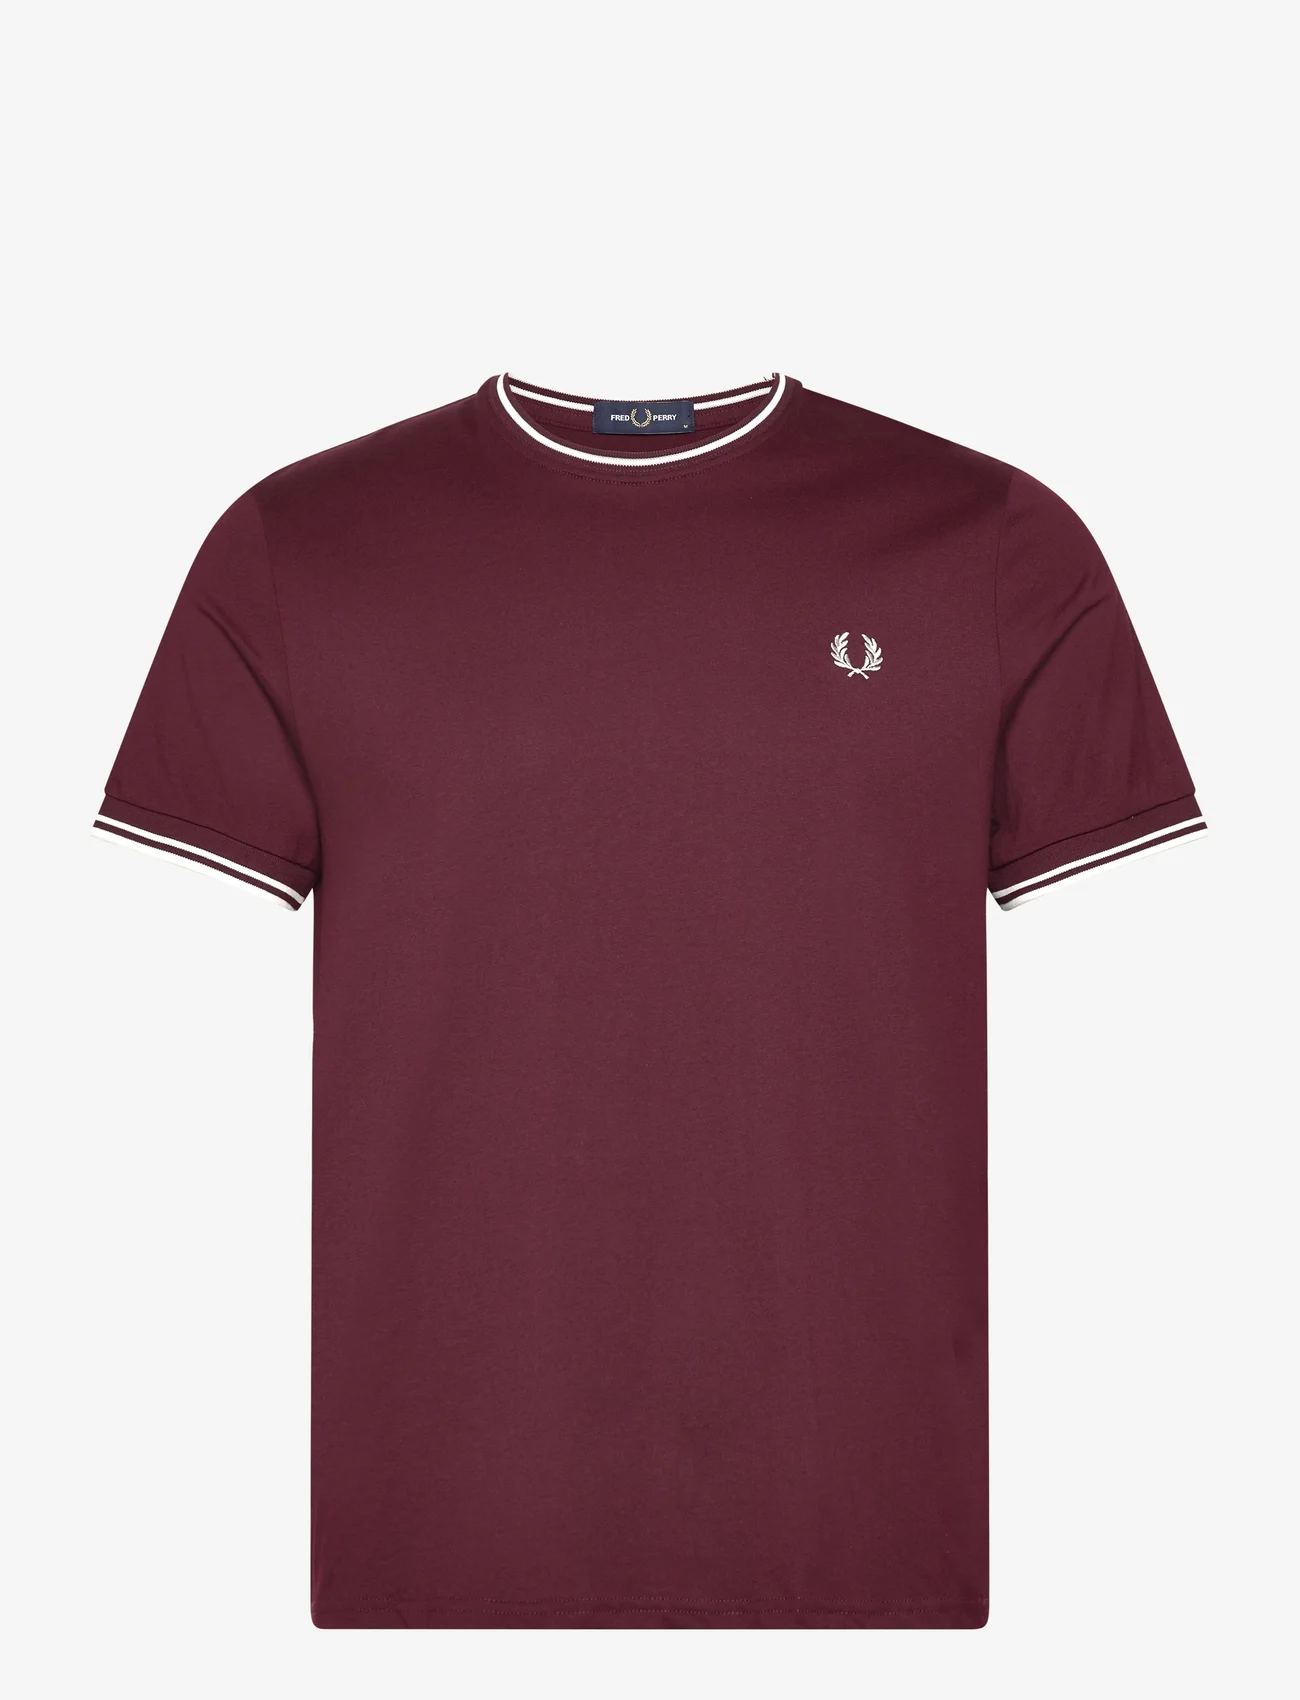 Fred Perry - TWIN TIPPED T-SHIRT - perus t-paidat - oxblood - 0